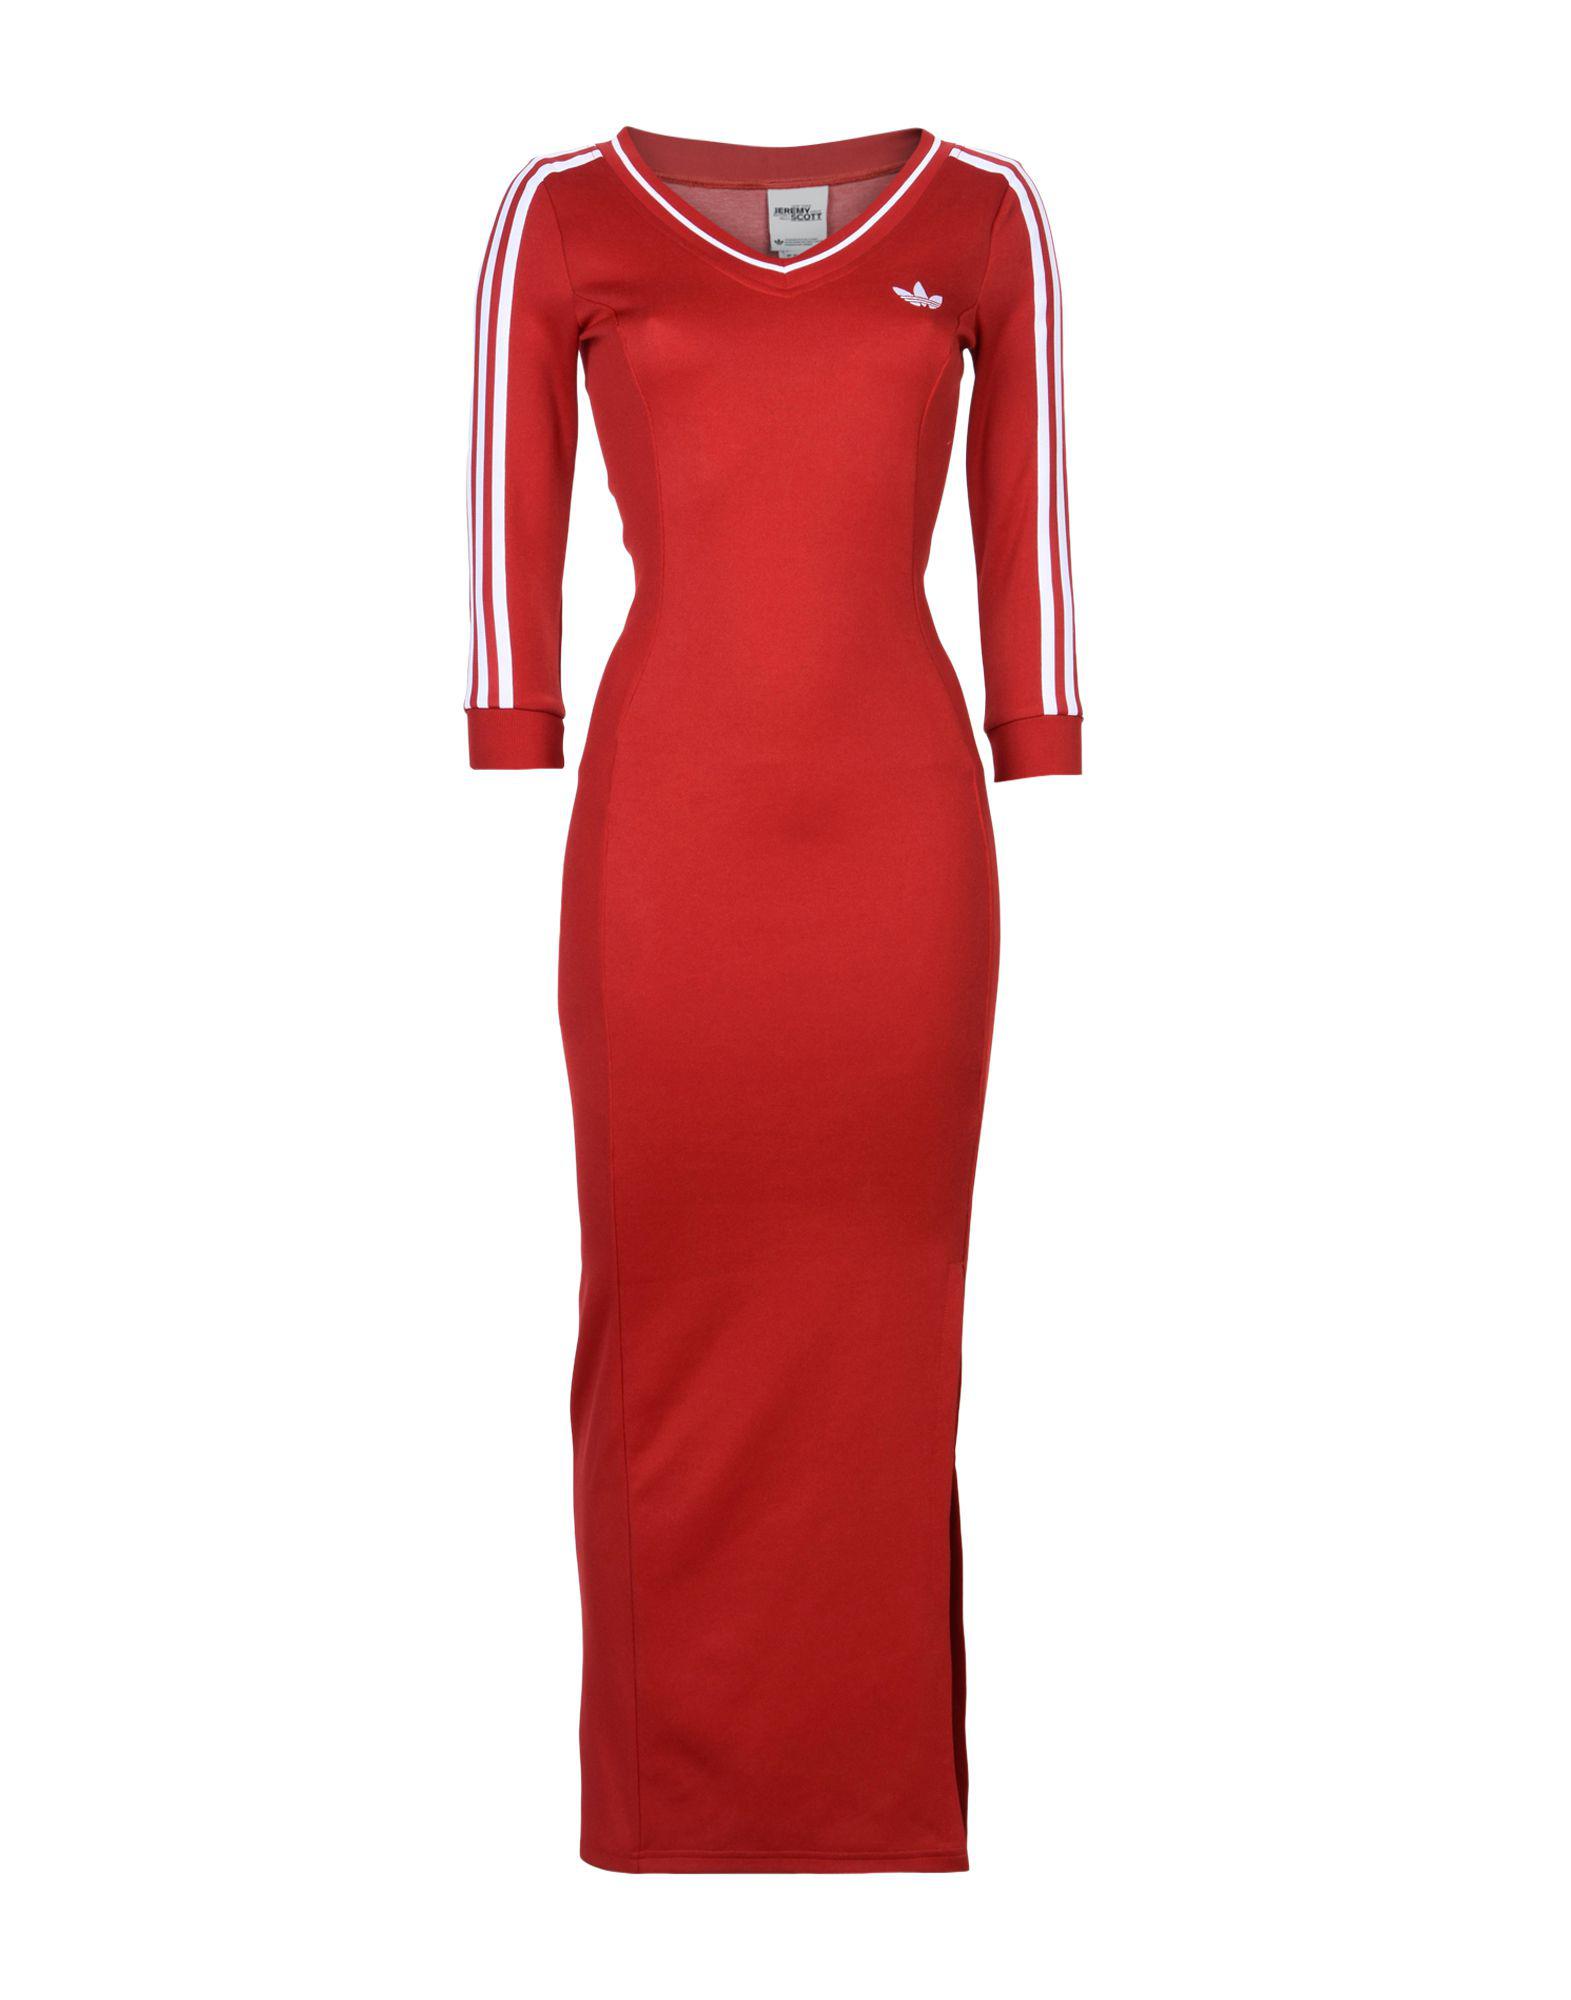 Jeremy Scott for adidas Dress in Red | Lyst